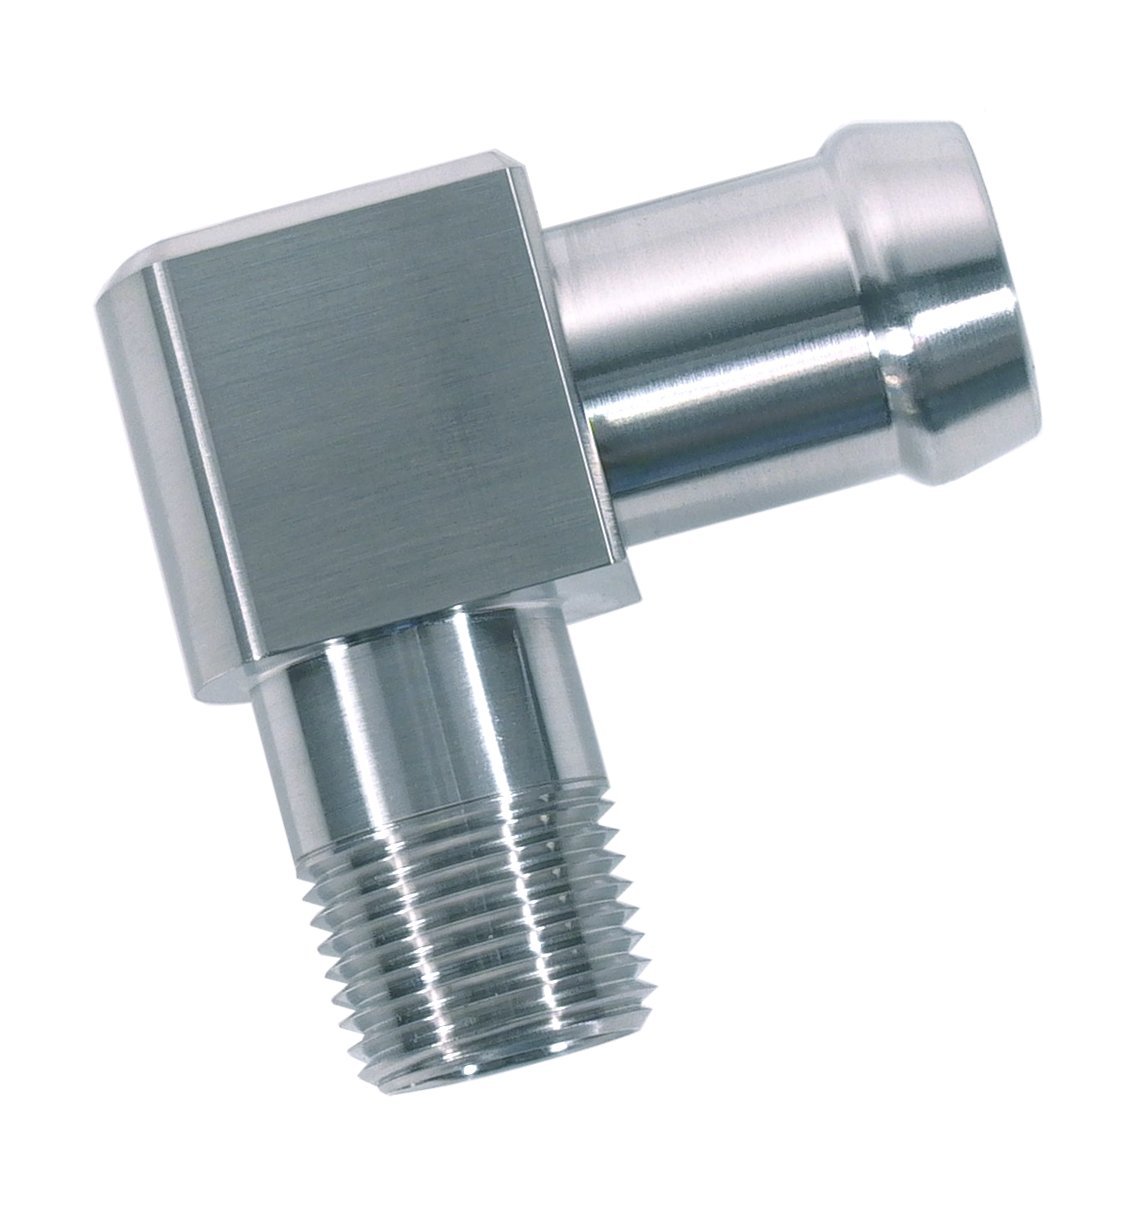 Heater Hose Fitting, 90-Degree, 3/8 in. NPT x 5/8 in. Hose Barb, 1 3/4 in. Length [Natural Finish]